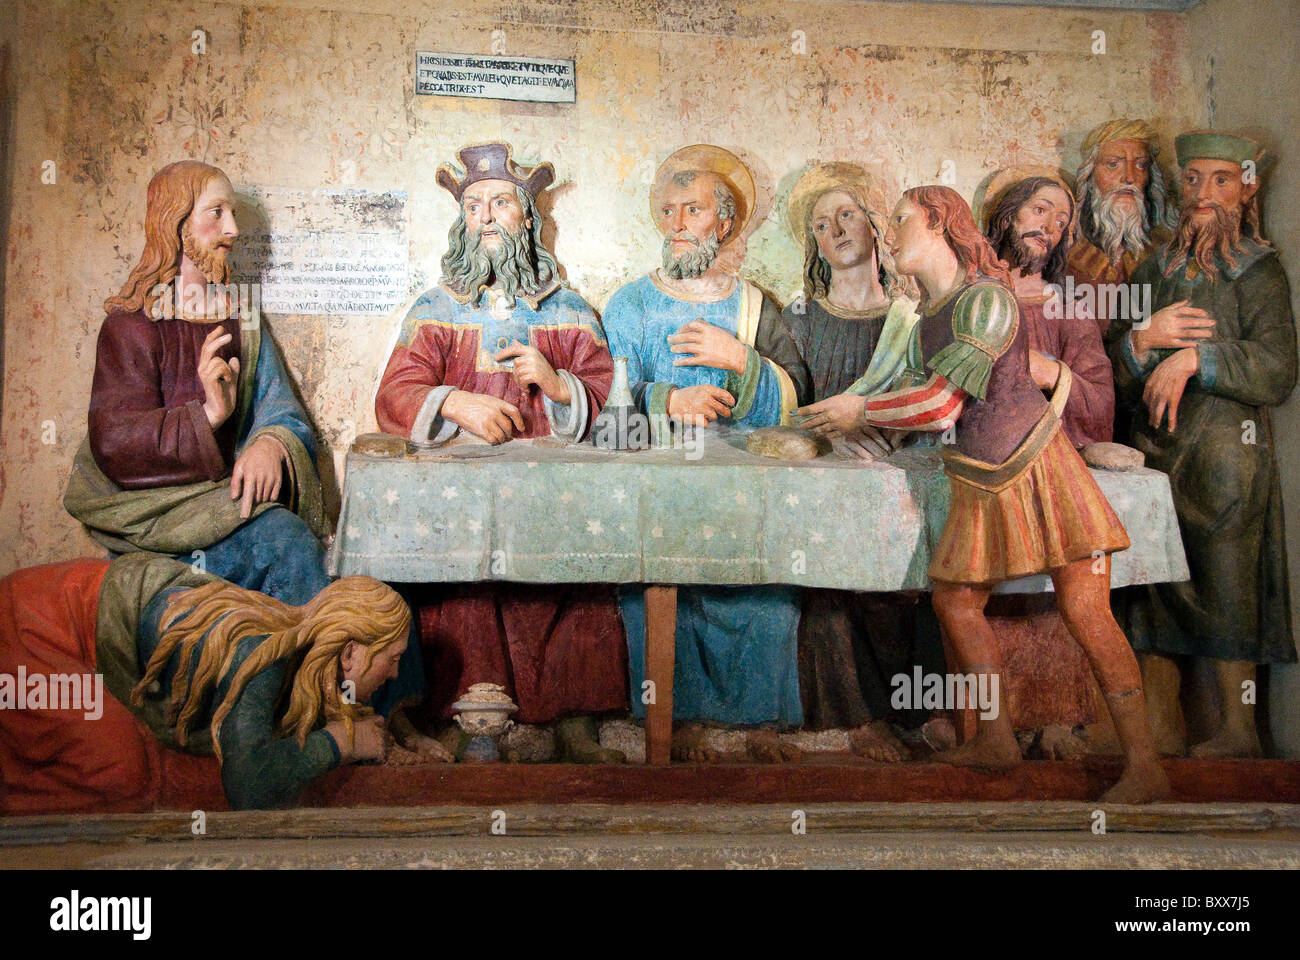 Polychrome bas relief of the Last Supper in terracotta in one of the stations of the cross at the monestry of San Vivaldo, Tusca Stock Photo